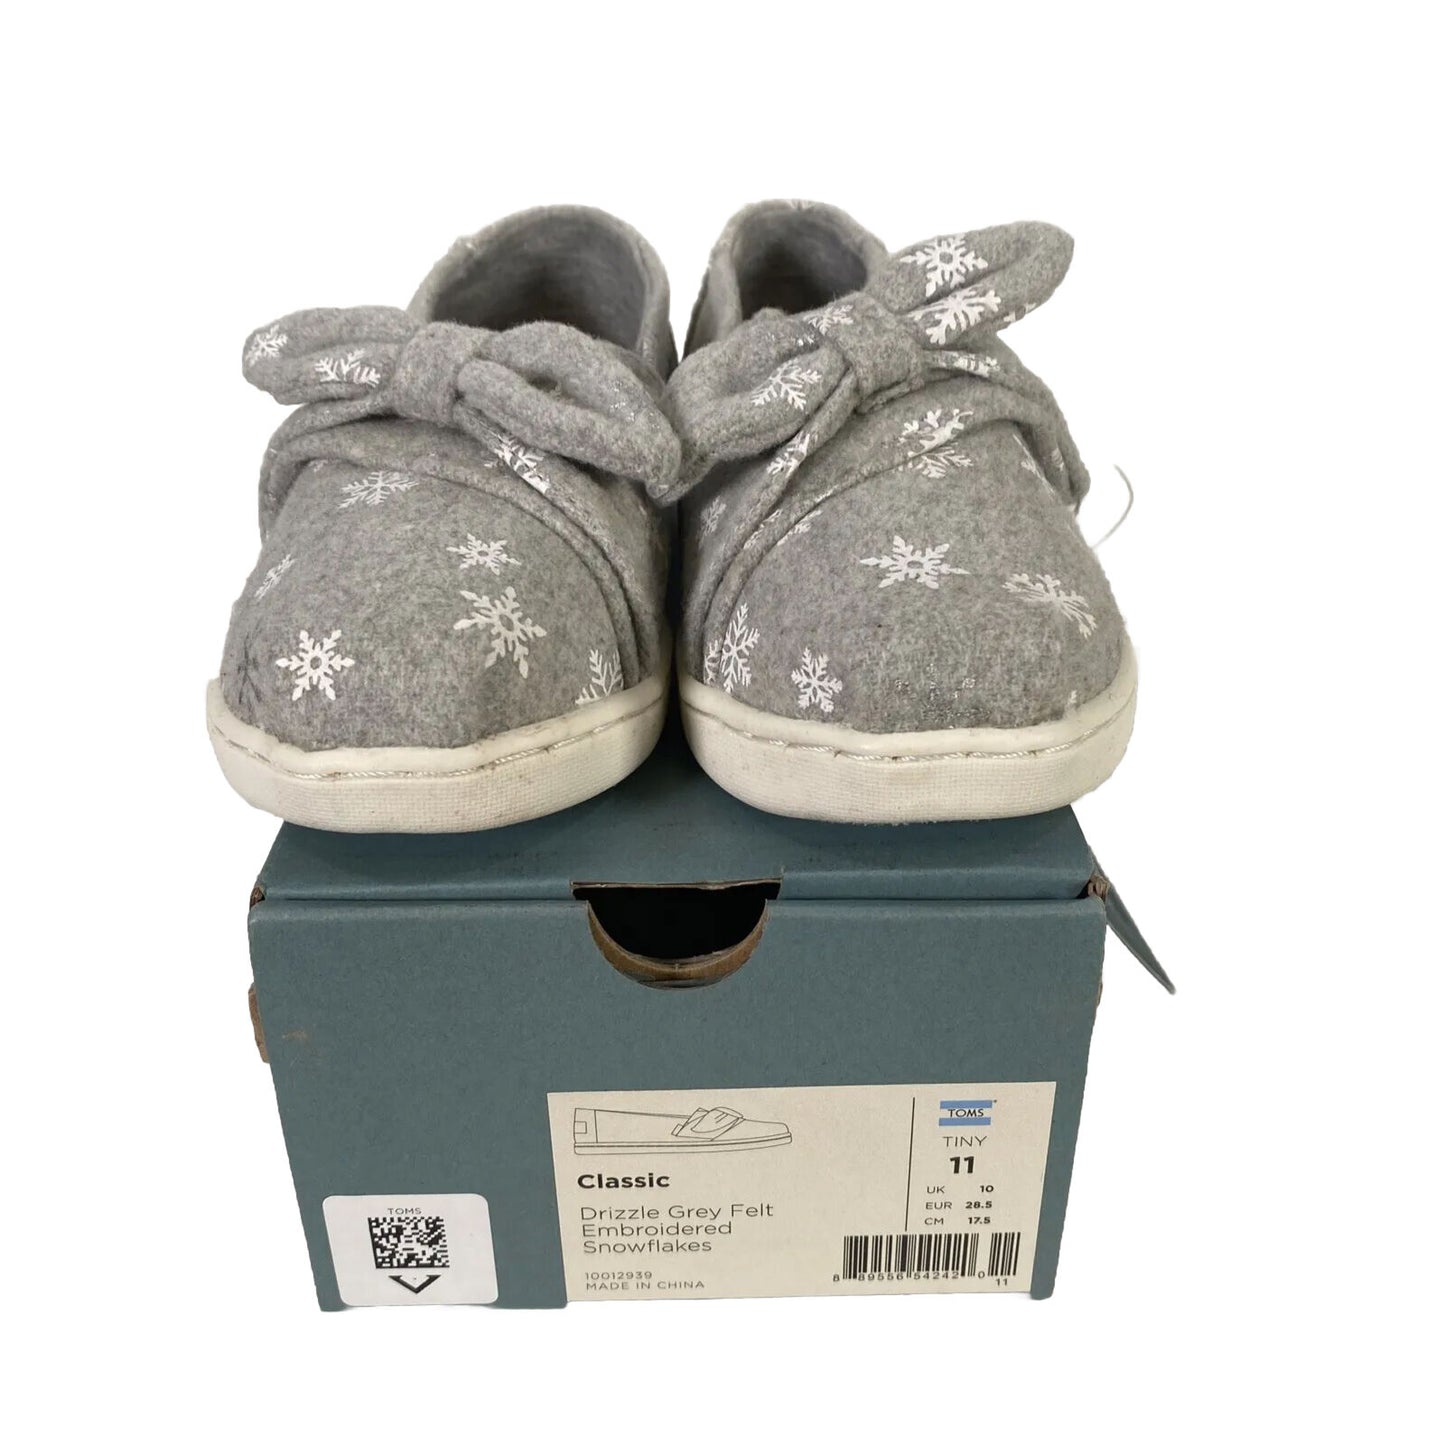 NEW Toms Girls Toddler Gray Drizzle Felt Embroidered Slip On Loafers - 11